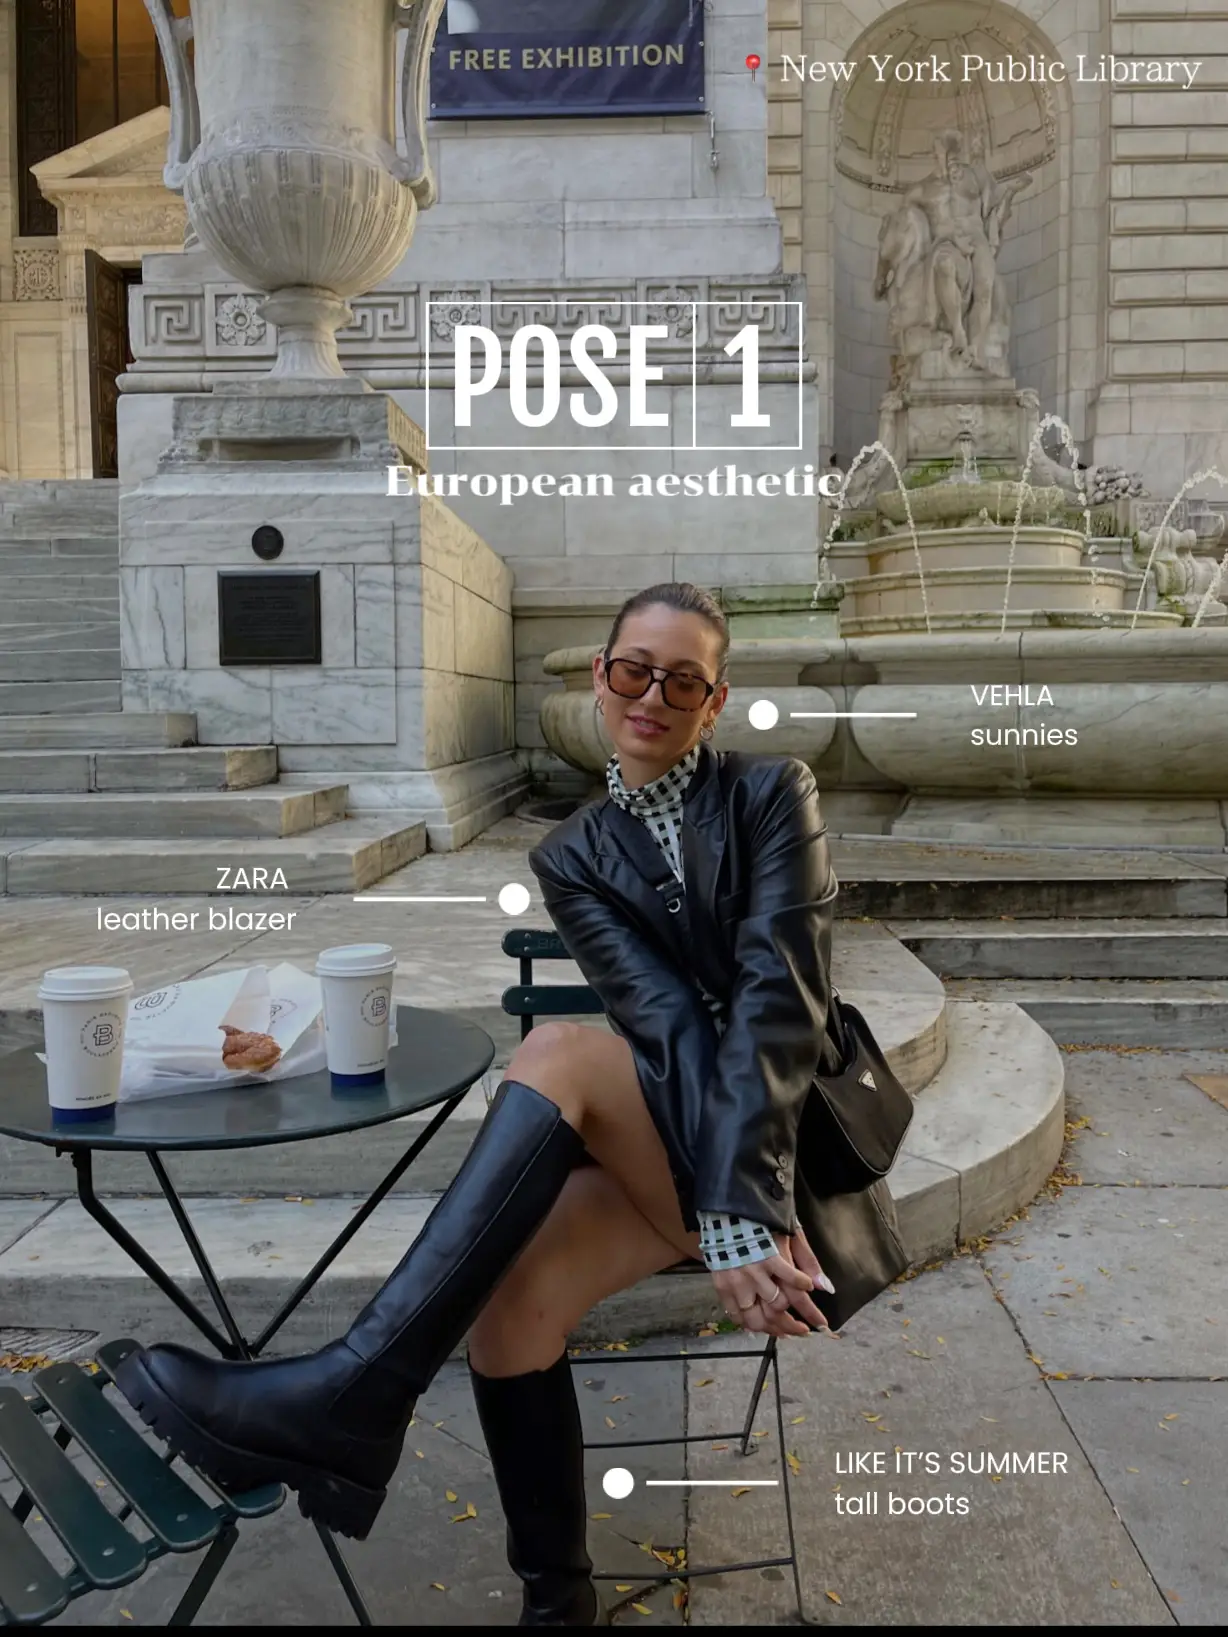 4 Pose Ideas for an aesthetic pic!